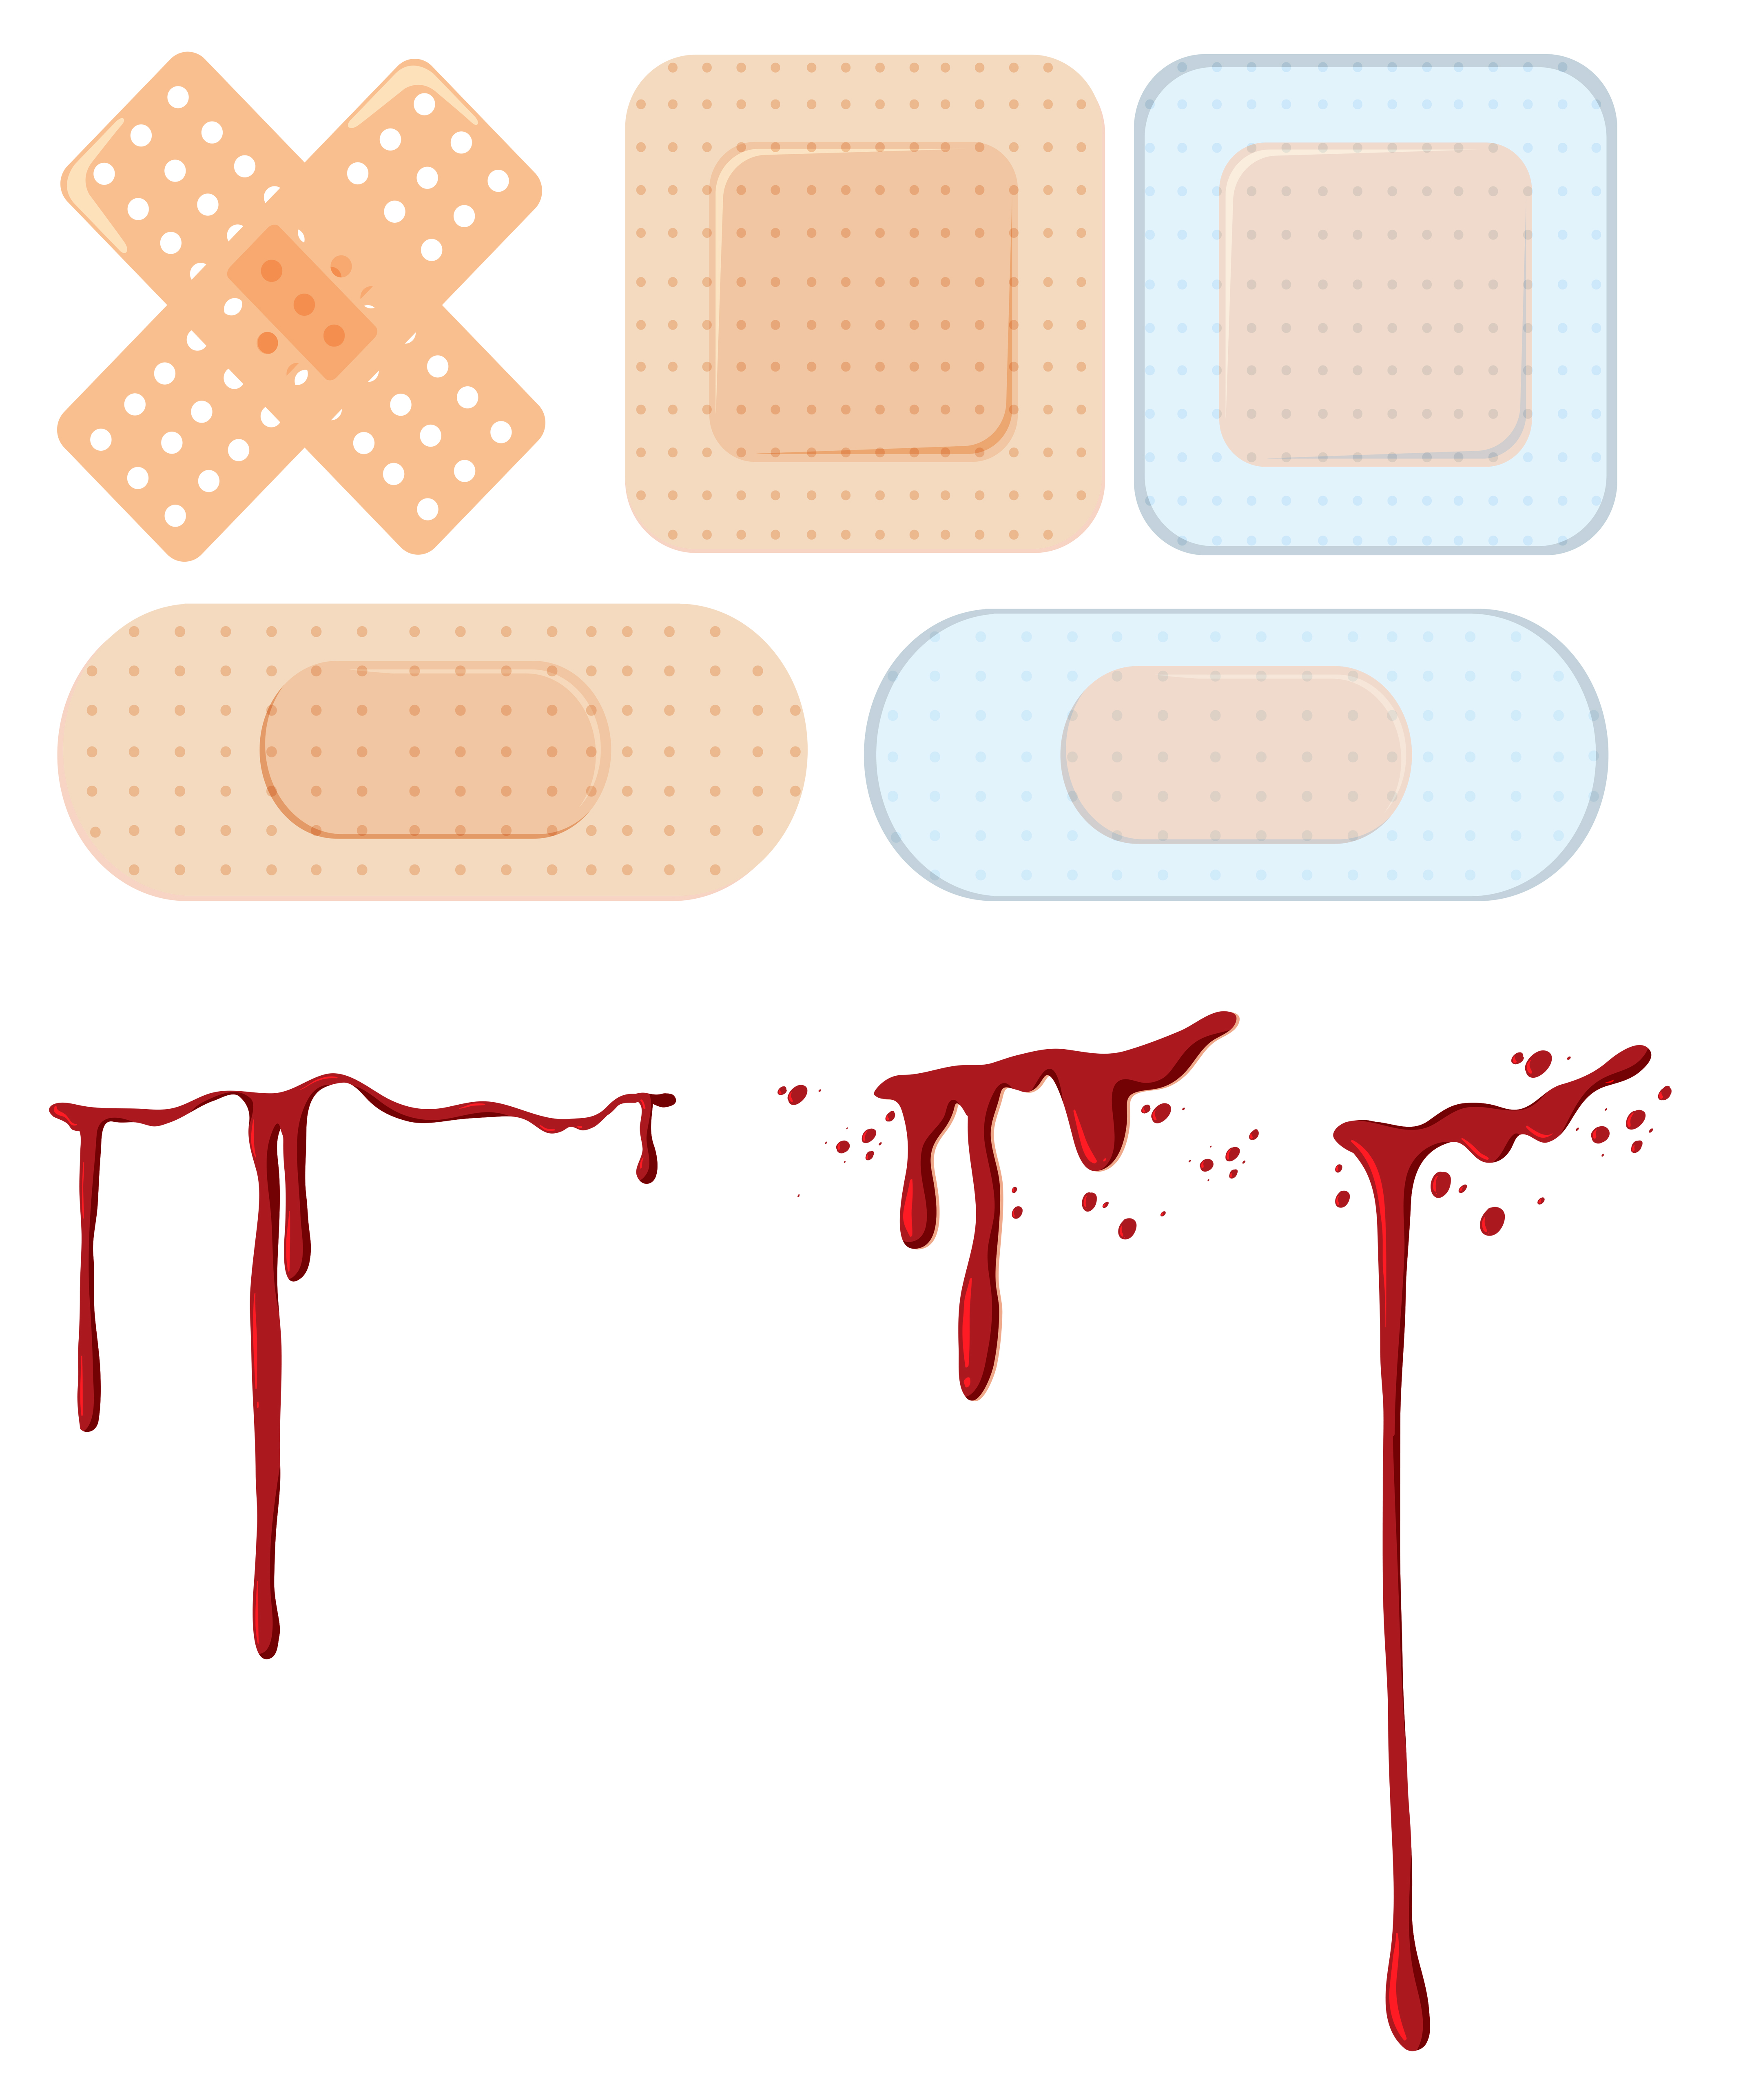 Download the A set of wound and bandage 606406